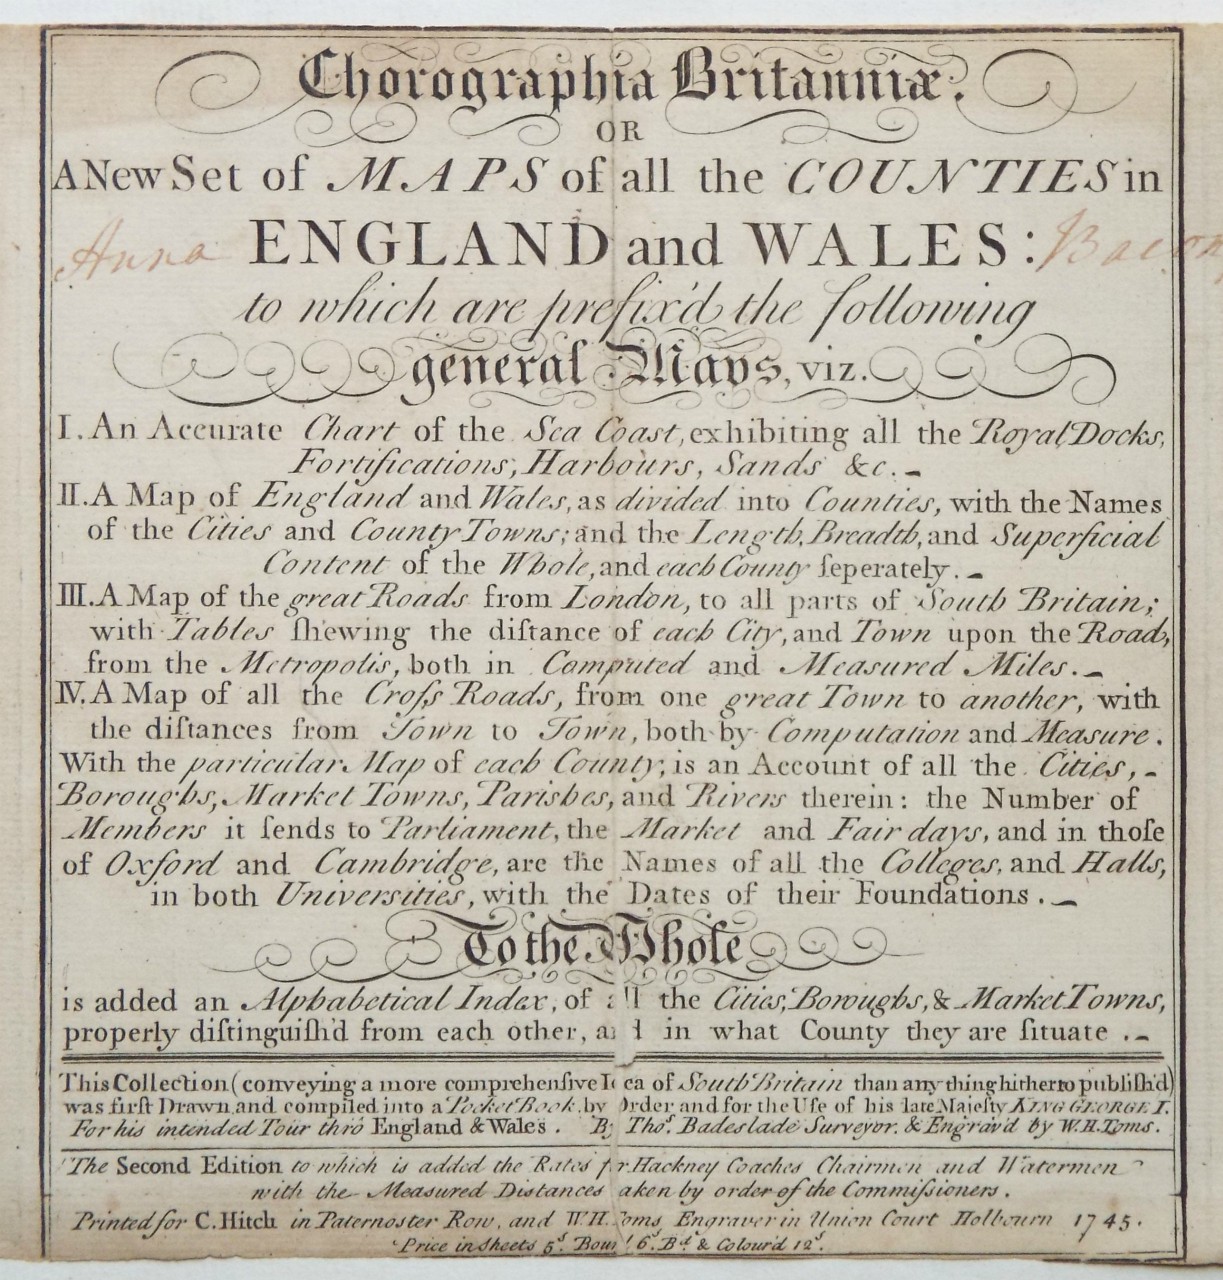 Print - Geographia Britannia or a New Set of Maps of all the Counties in England and Wales